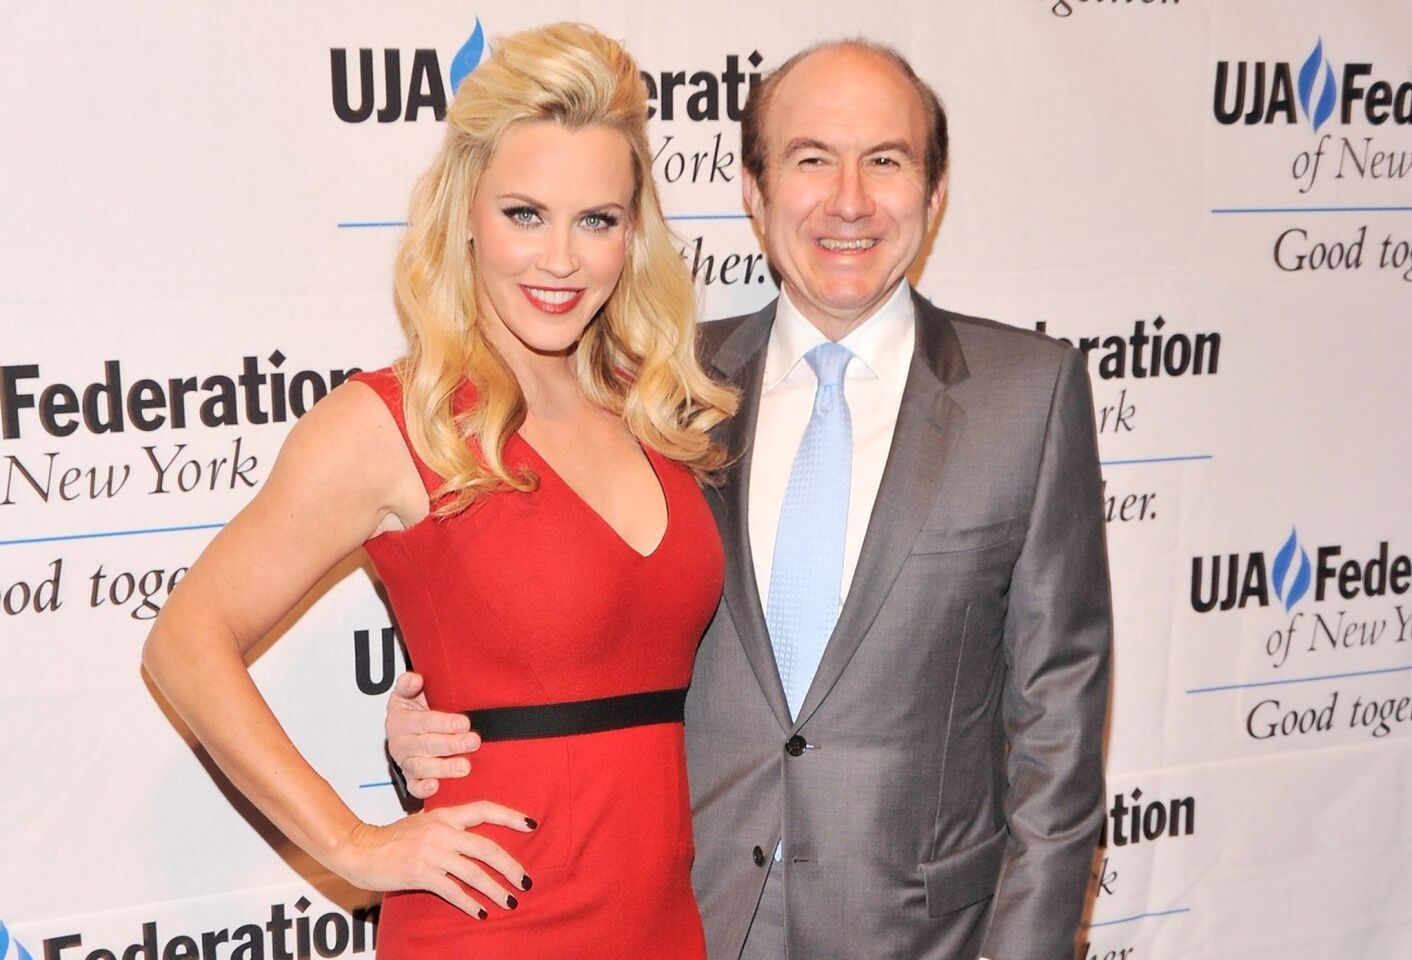 Putting her comedic skills to the test, McCarthy began hosting "The Jenny McCarthy Show" on VH1. It was a pop-culture talk show featuring guests such as Nicole "Snooki" Polizzi, Lil Jon and Bar Refaeli. McCarthy is shown here with Philippe Dauman, chief executive of Viacom Inc.